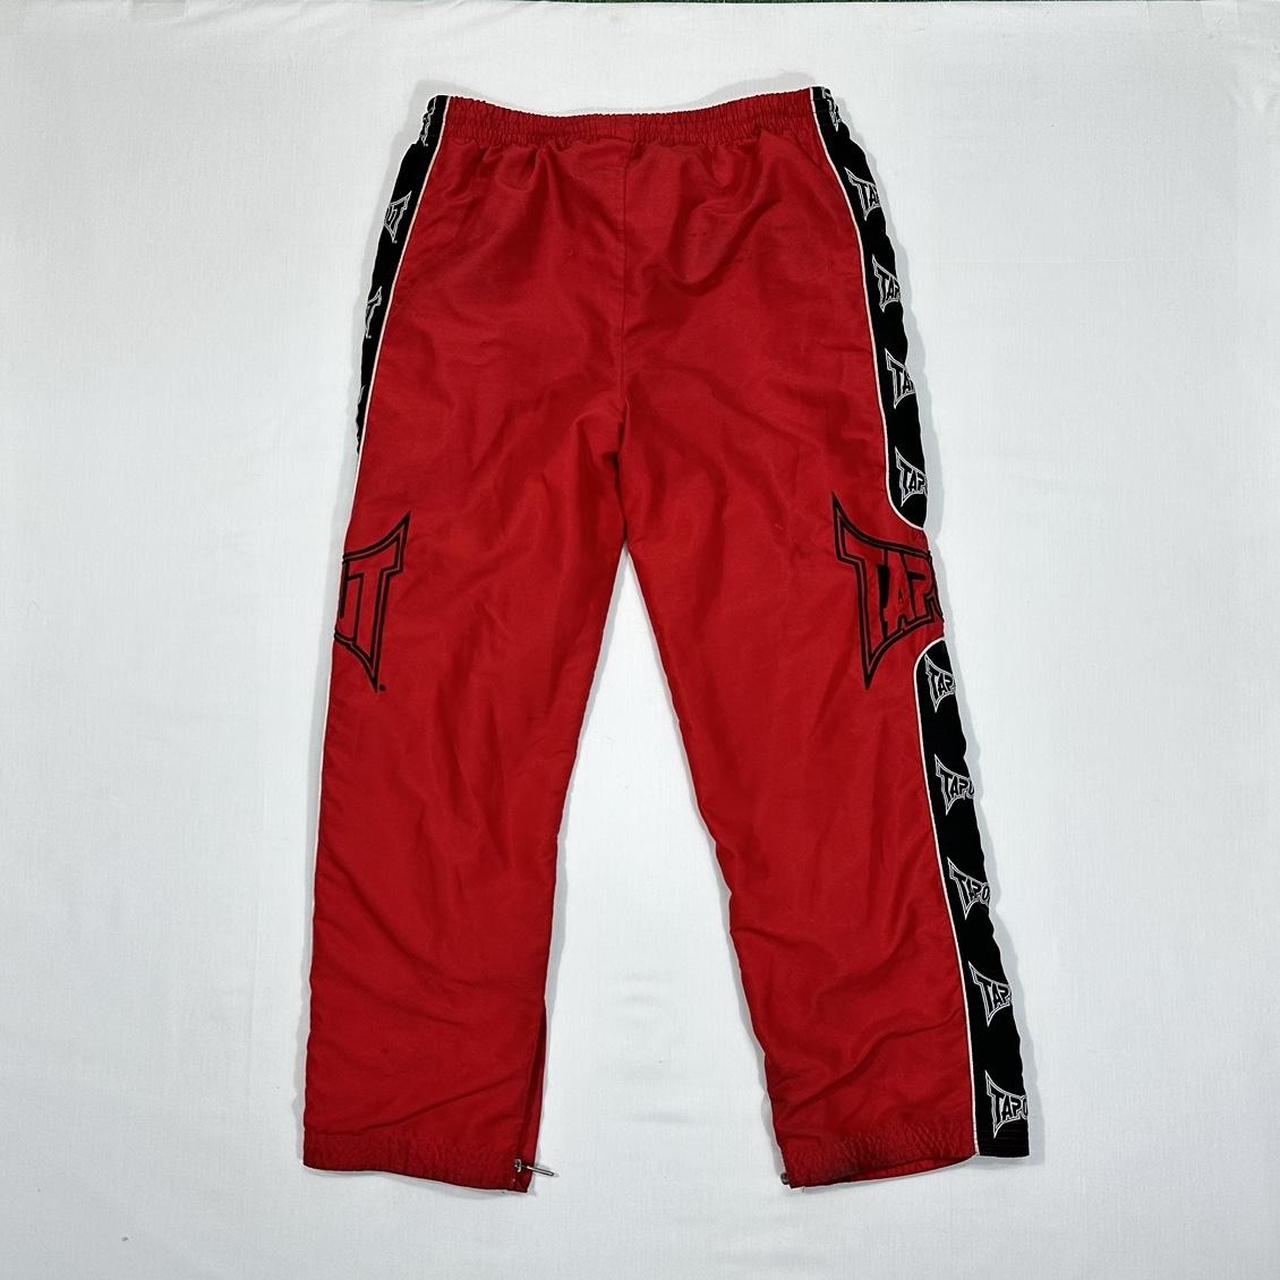 Tapout Pants Vintage 2000s Tapout Embroidered... - Depop